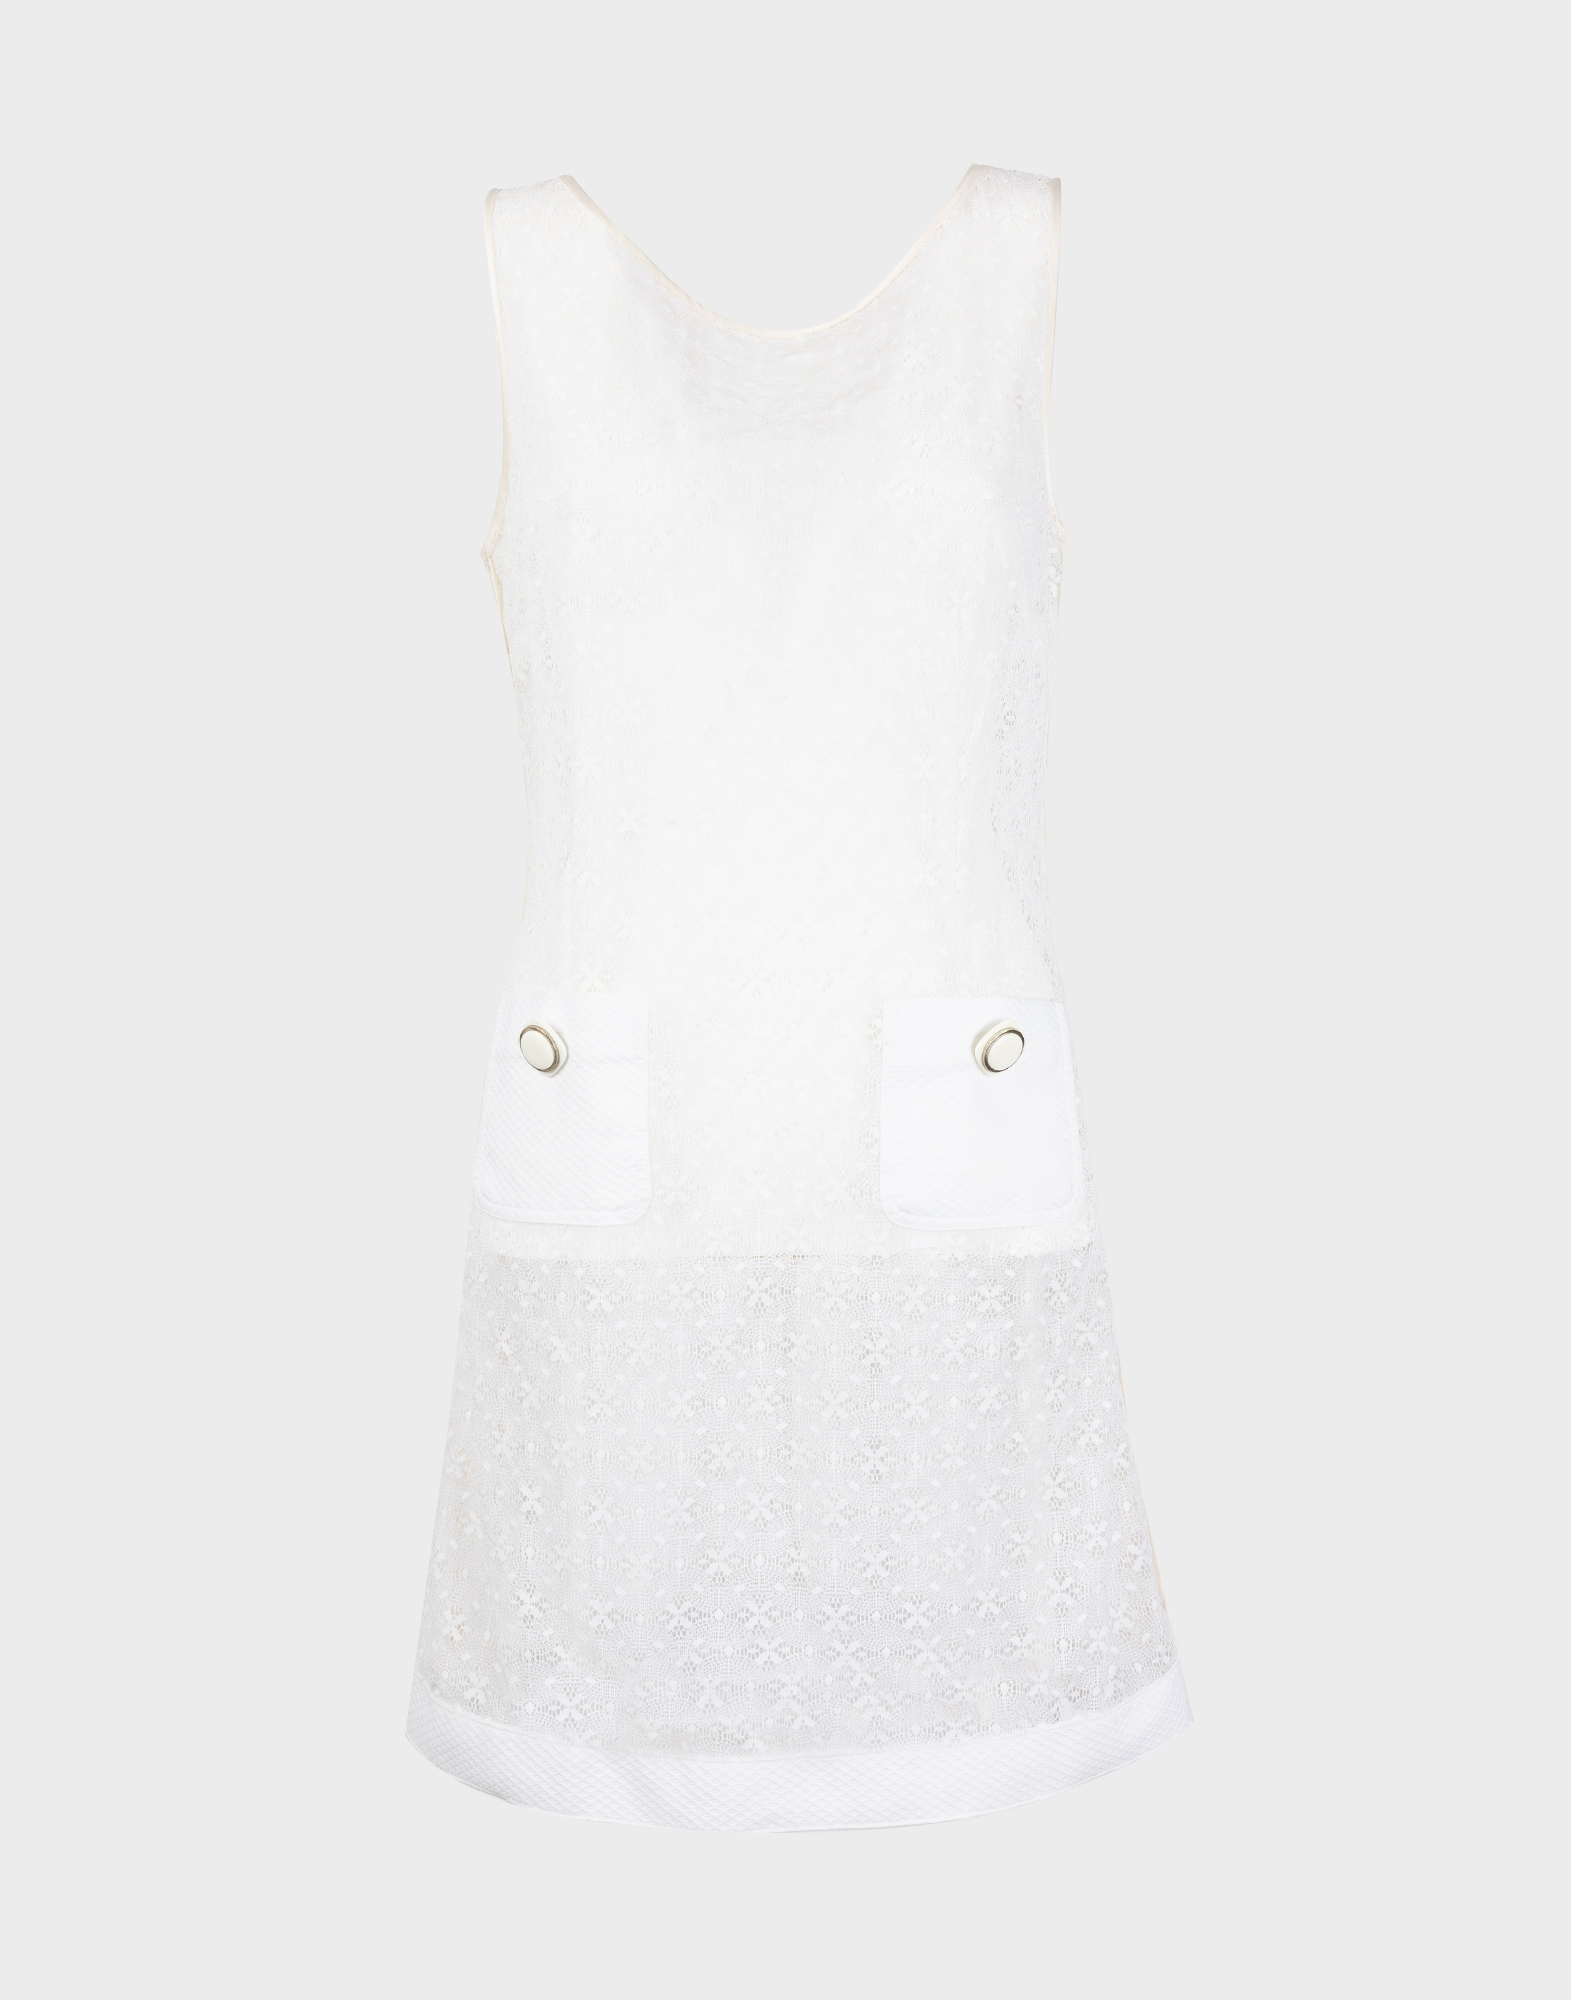 white women's dress in macramé fabric, round neckline and two front pockets with buttons